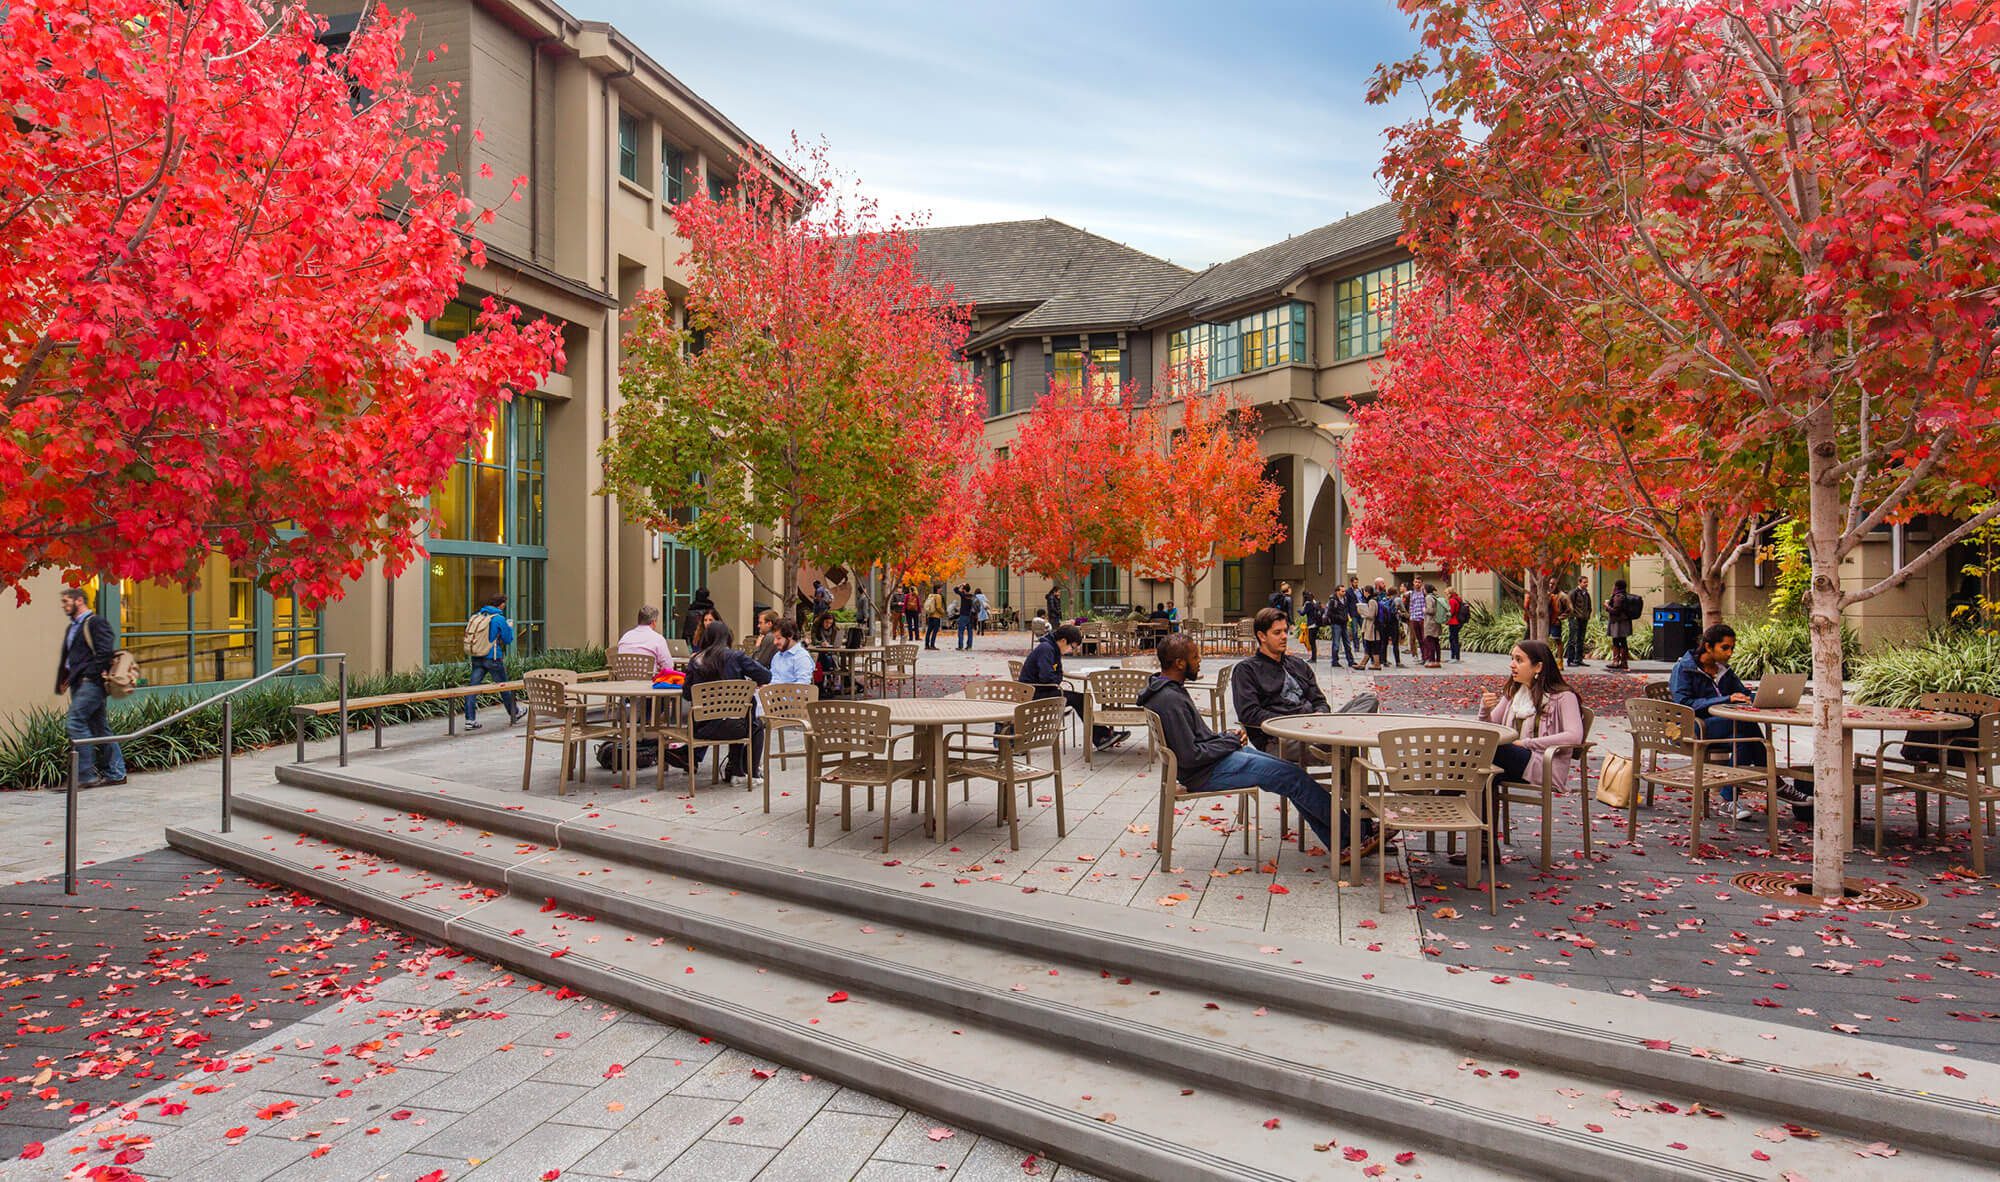 The courtyard of Berkeley Haas seen with trees in fall colors.